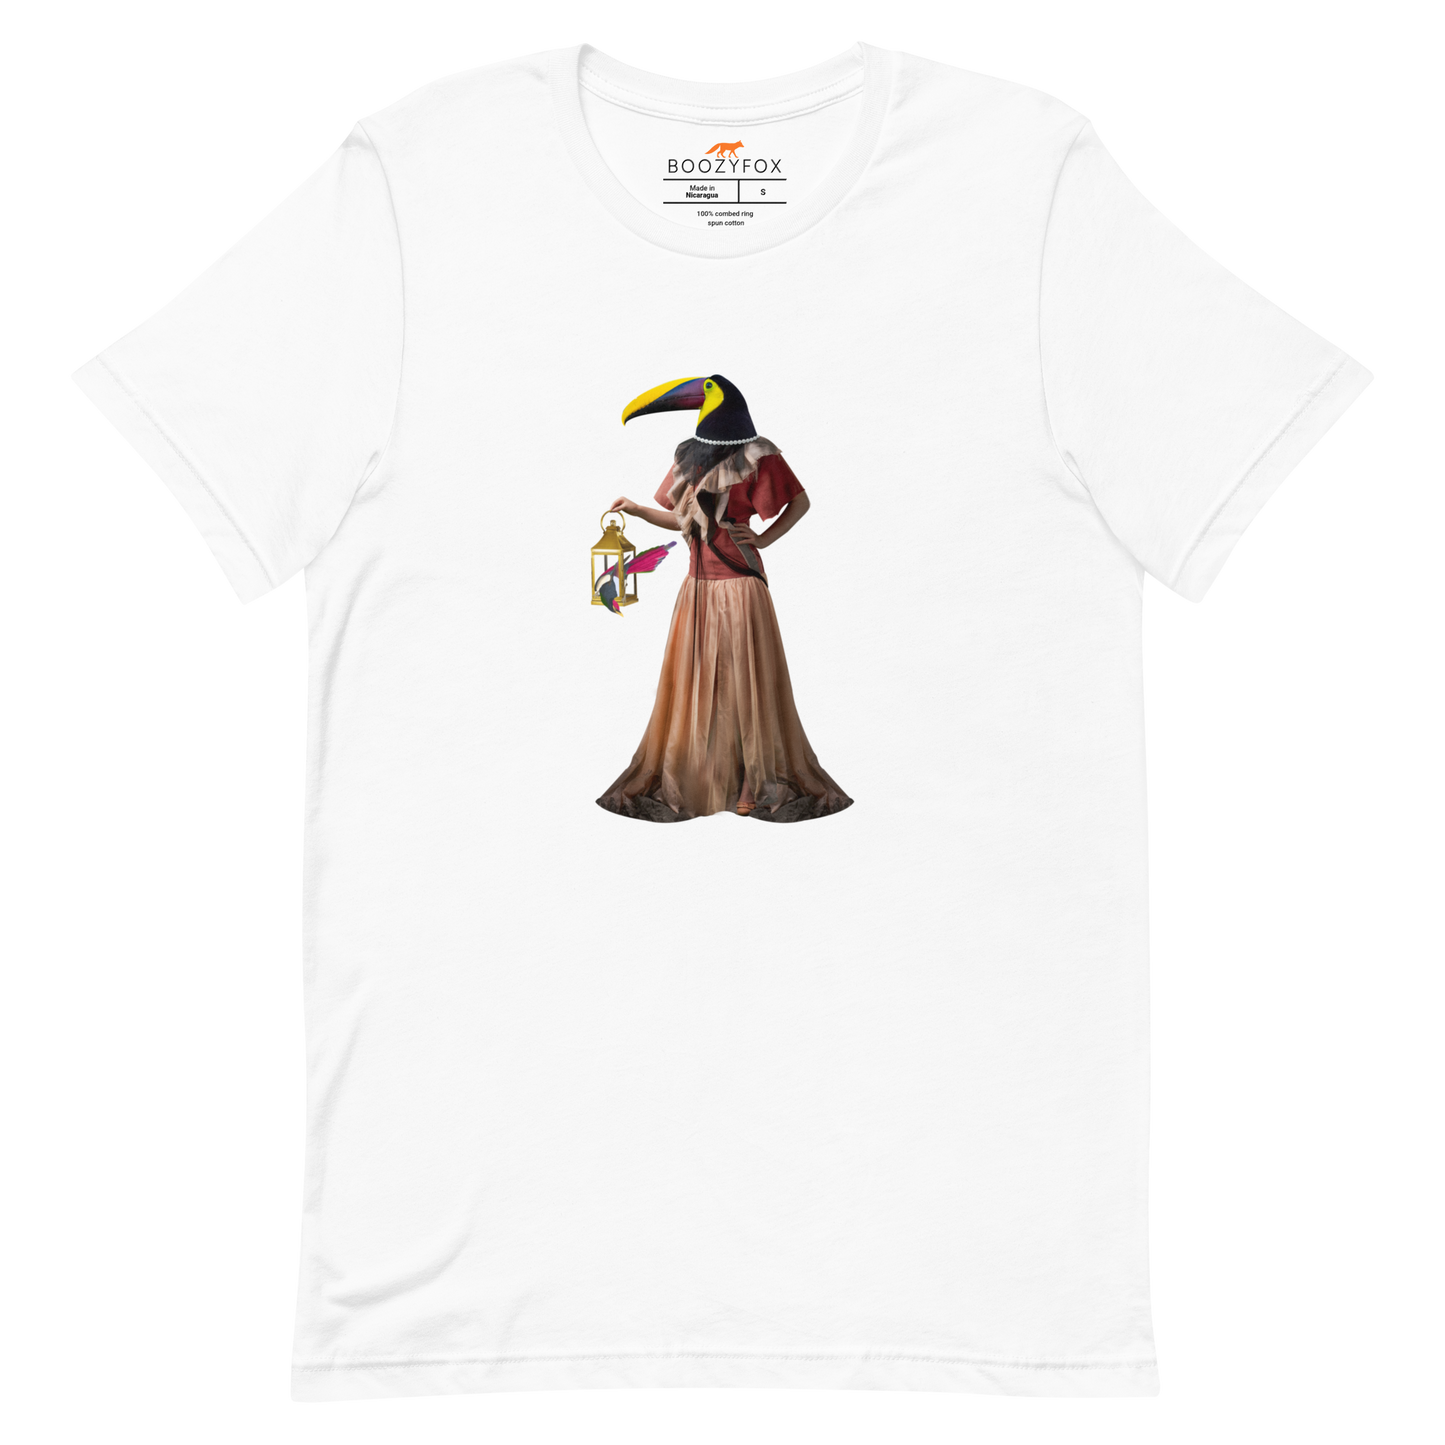 White Premium Toucan T-Shirt featuring an Anthropomorphic Toucan graphic on the chest - Funny Graphic Toucan Tees - Boozy Fox